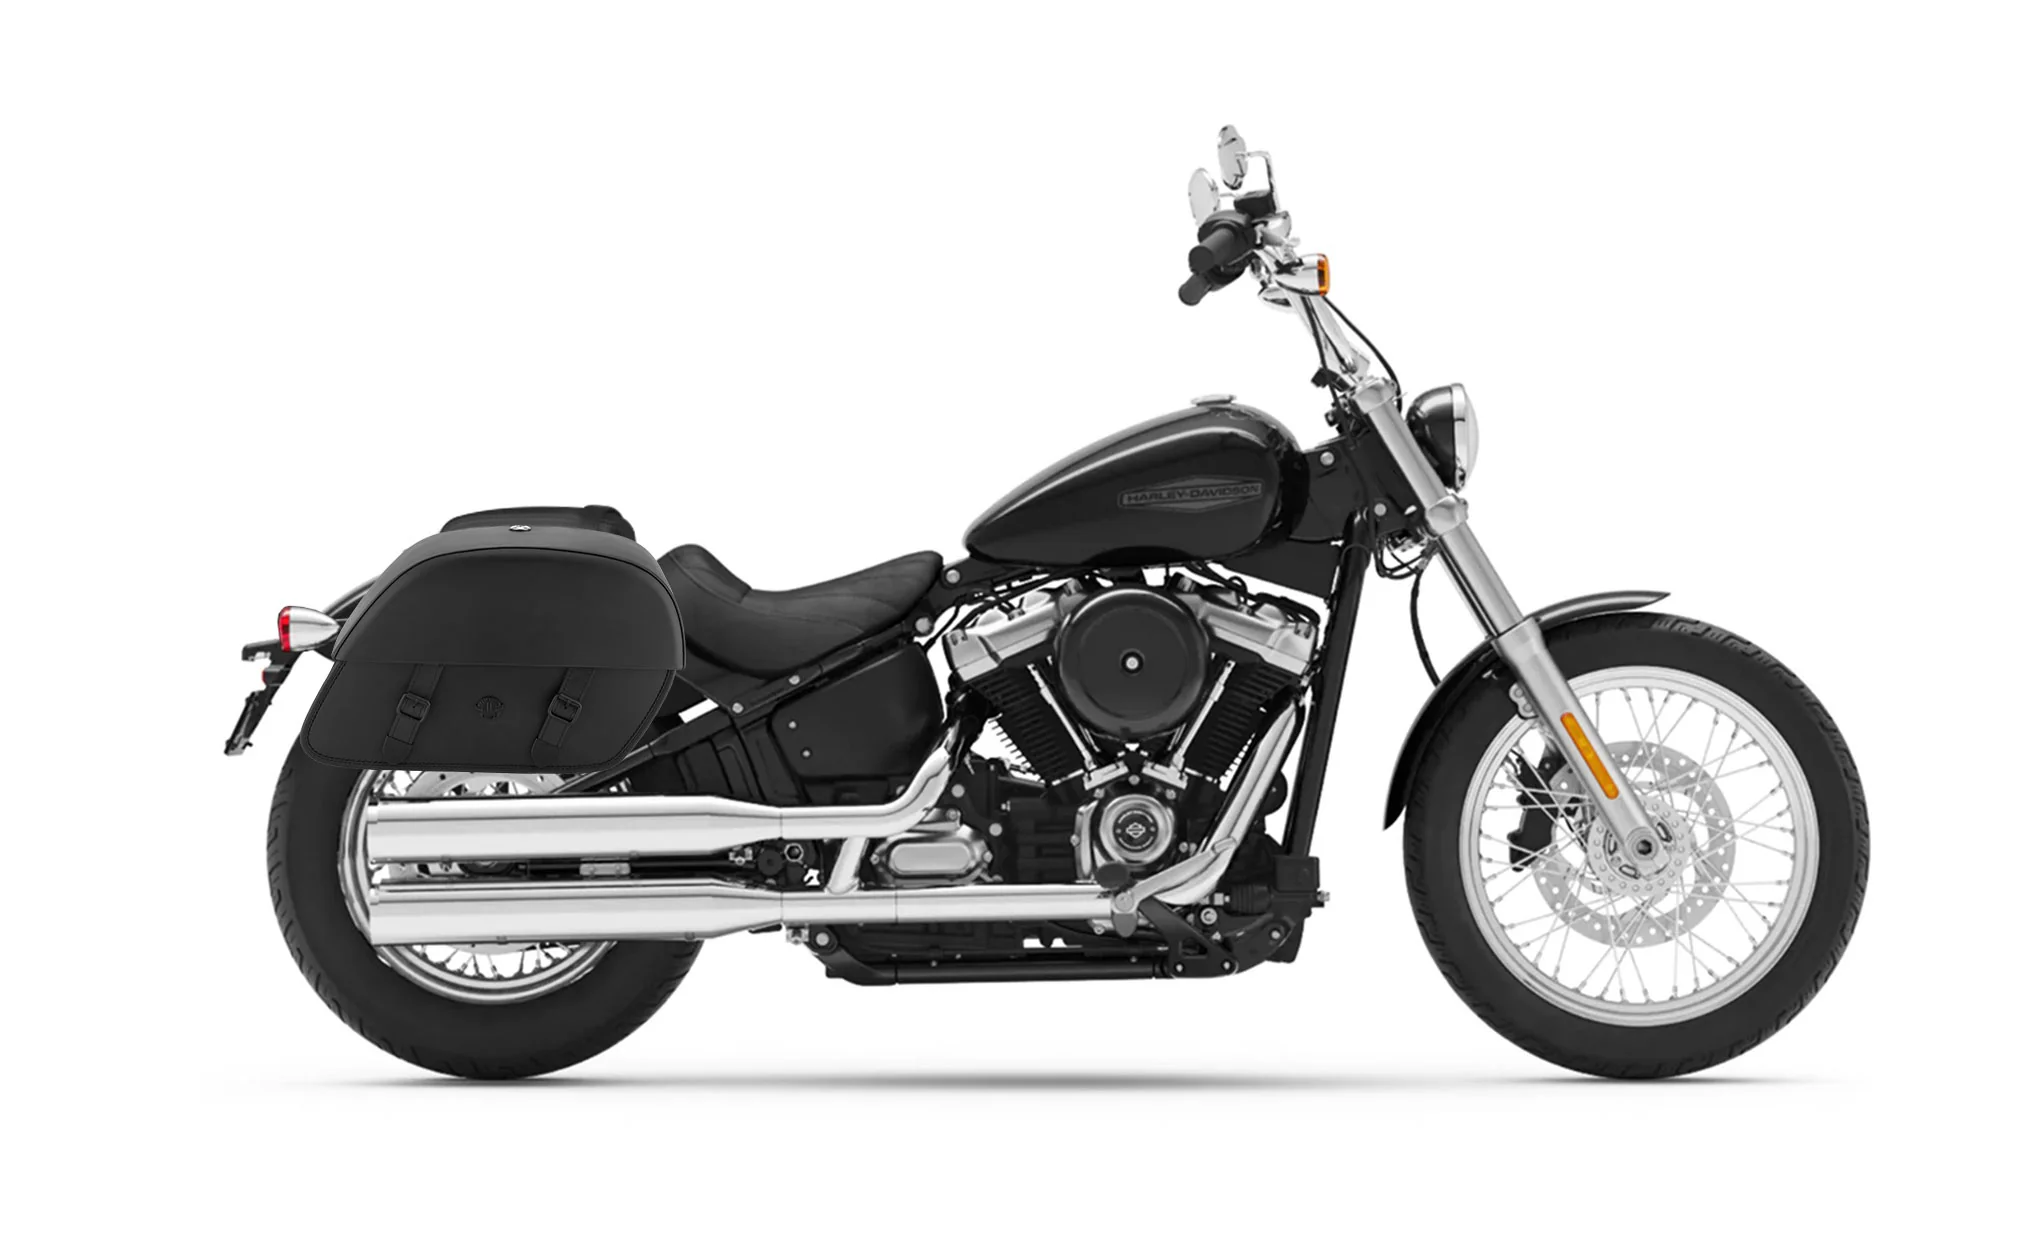 28L - Baelor Medium Quick Mount Motorcycle Saddlebags For Harley Softail Standard FXST @expand